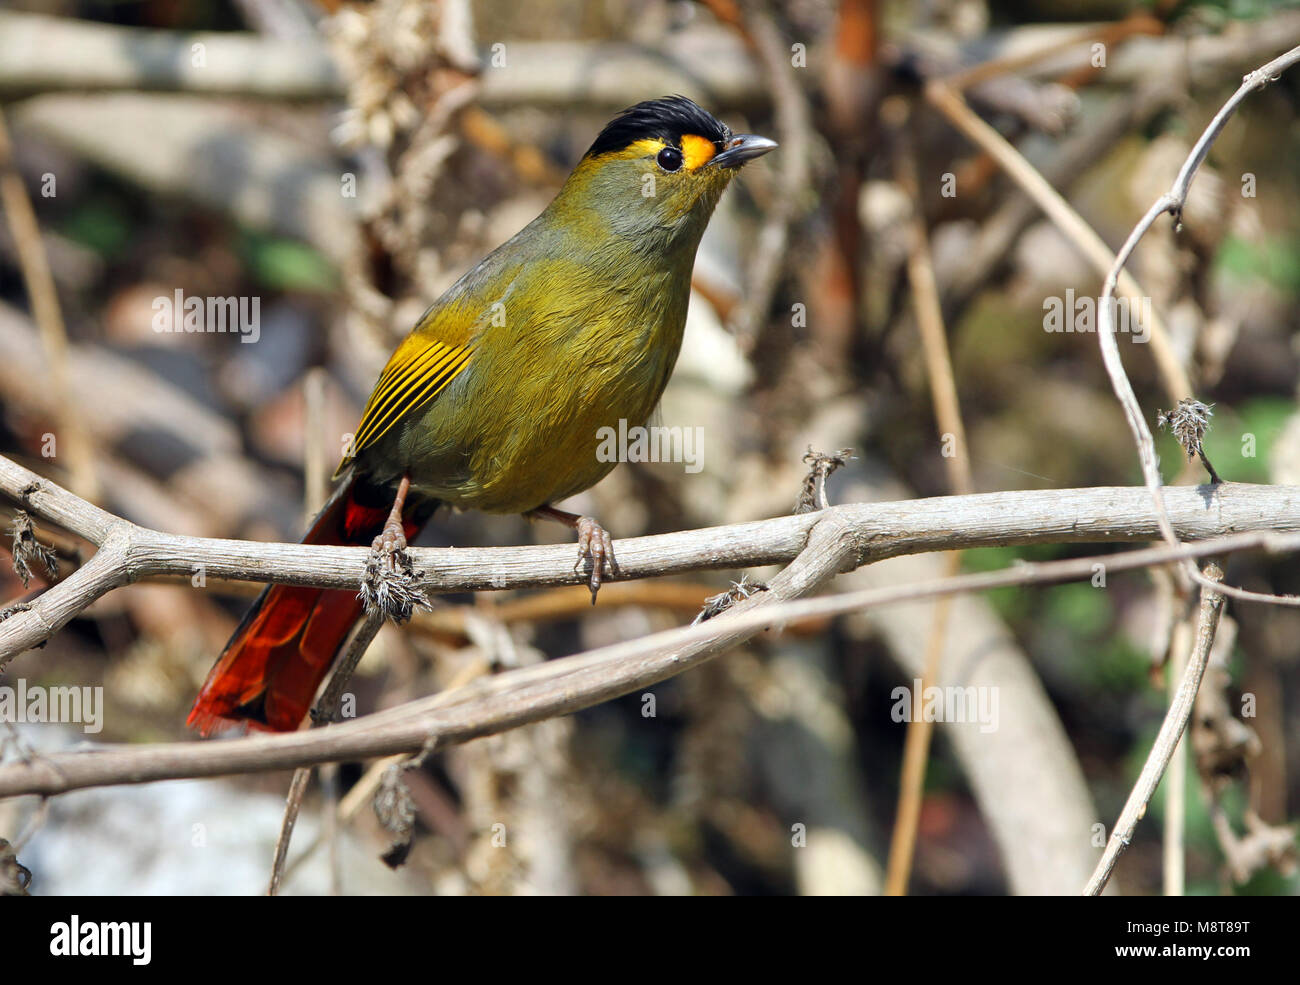 First spotted in 1995 in Arunachal Pradesh, India, the Bugun Liocichla was described as a new species in 2006. Stock Photo